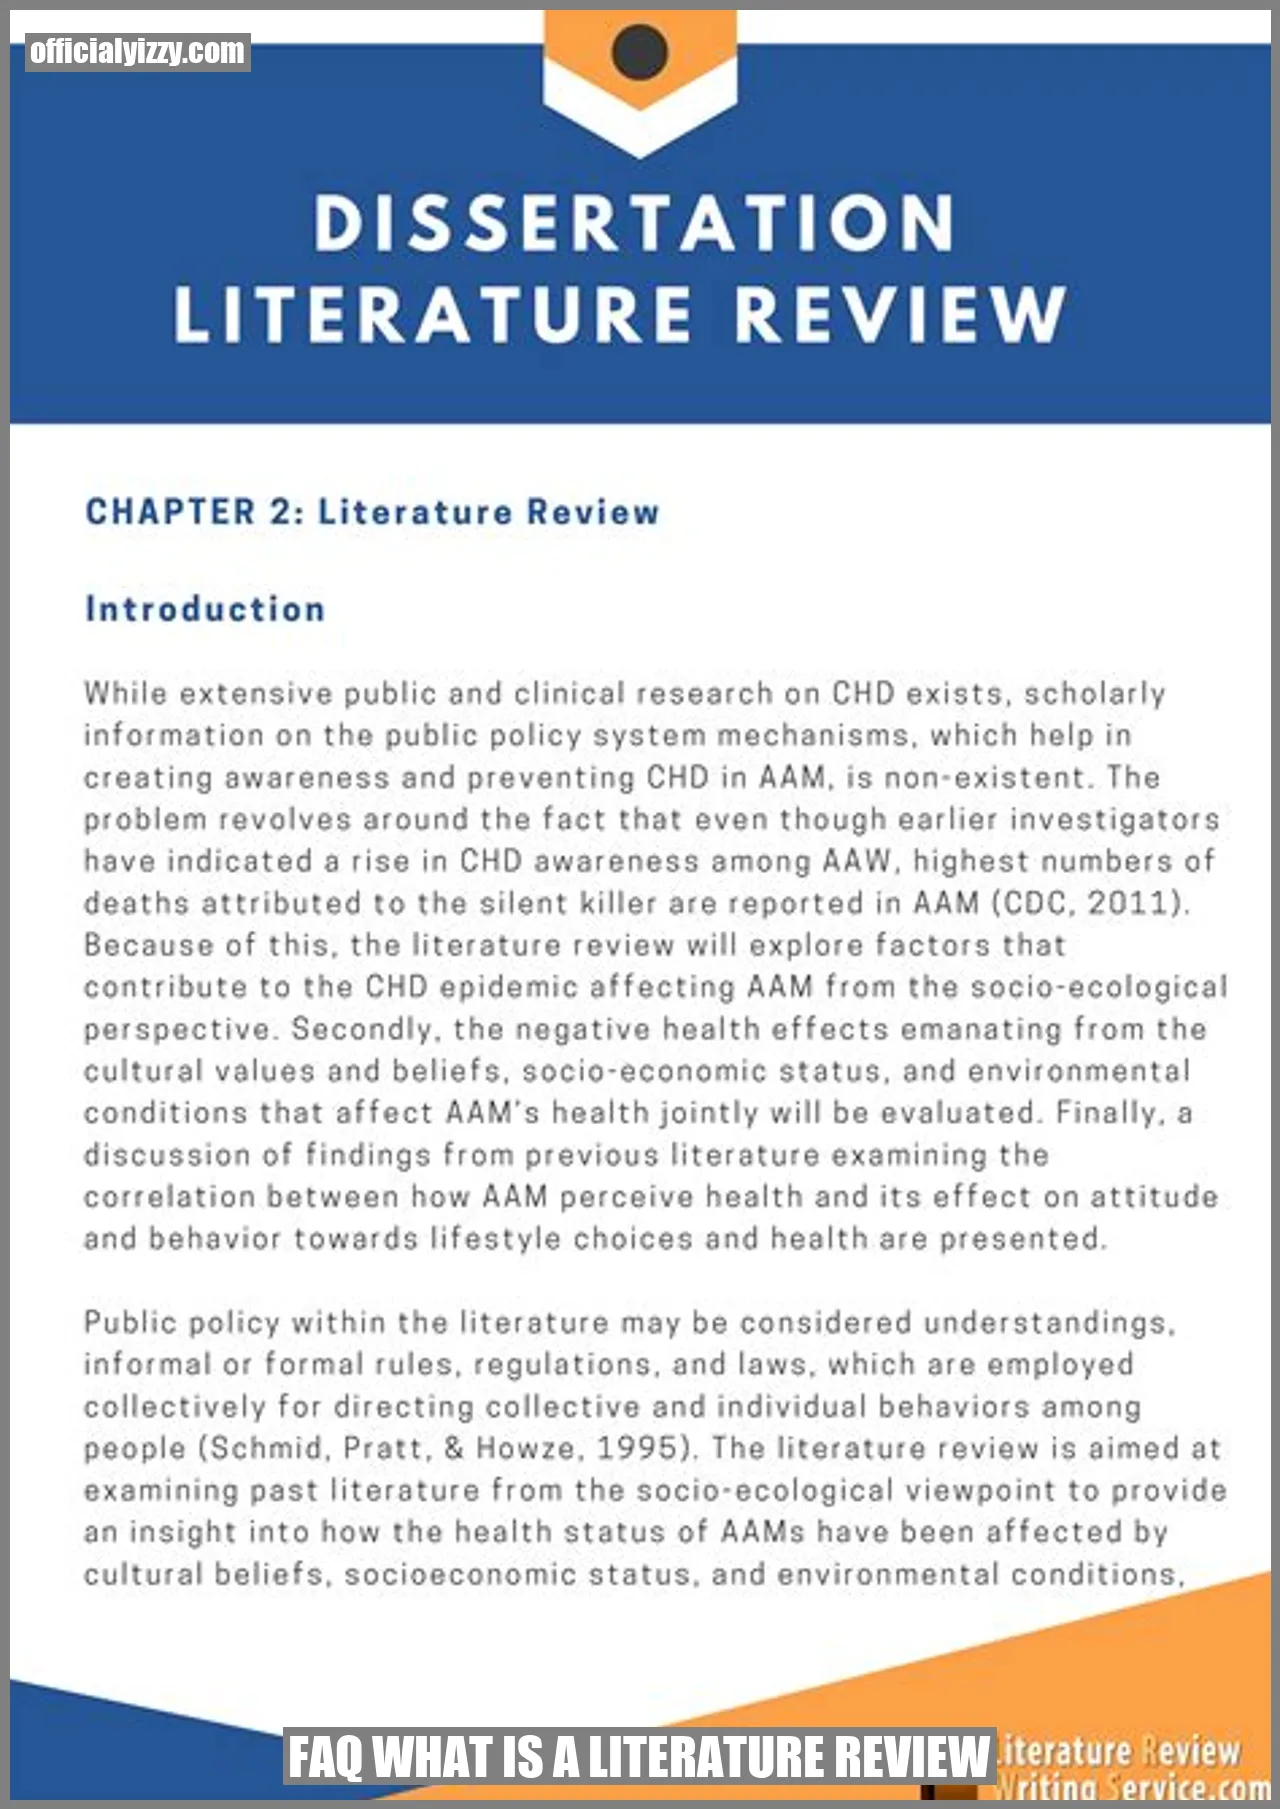 What is a Literature Review? - Official Yizzy